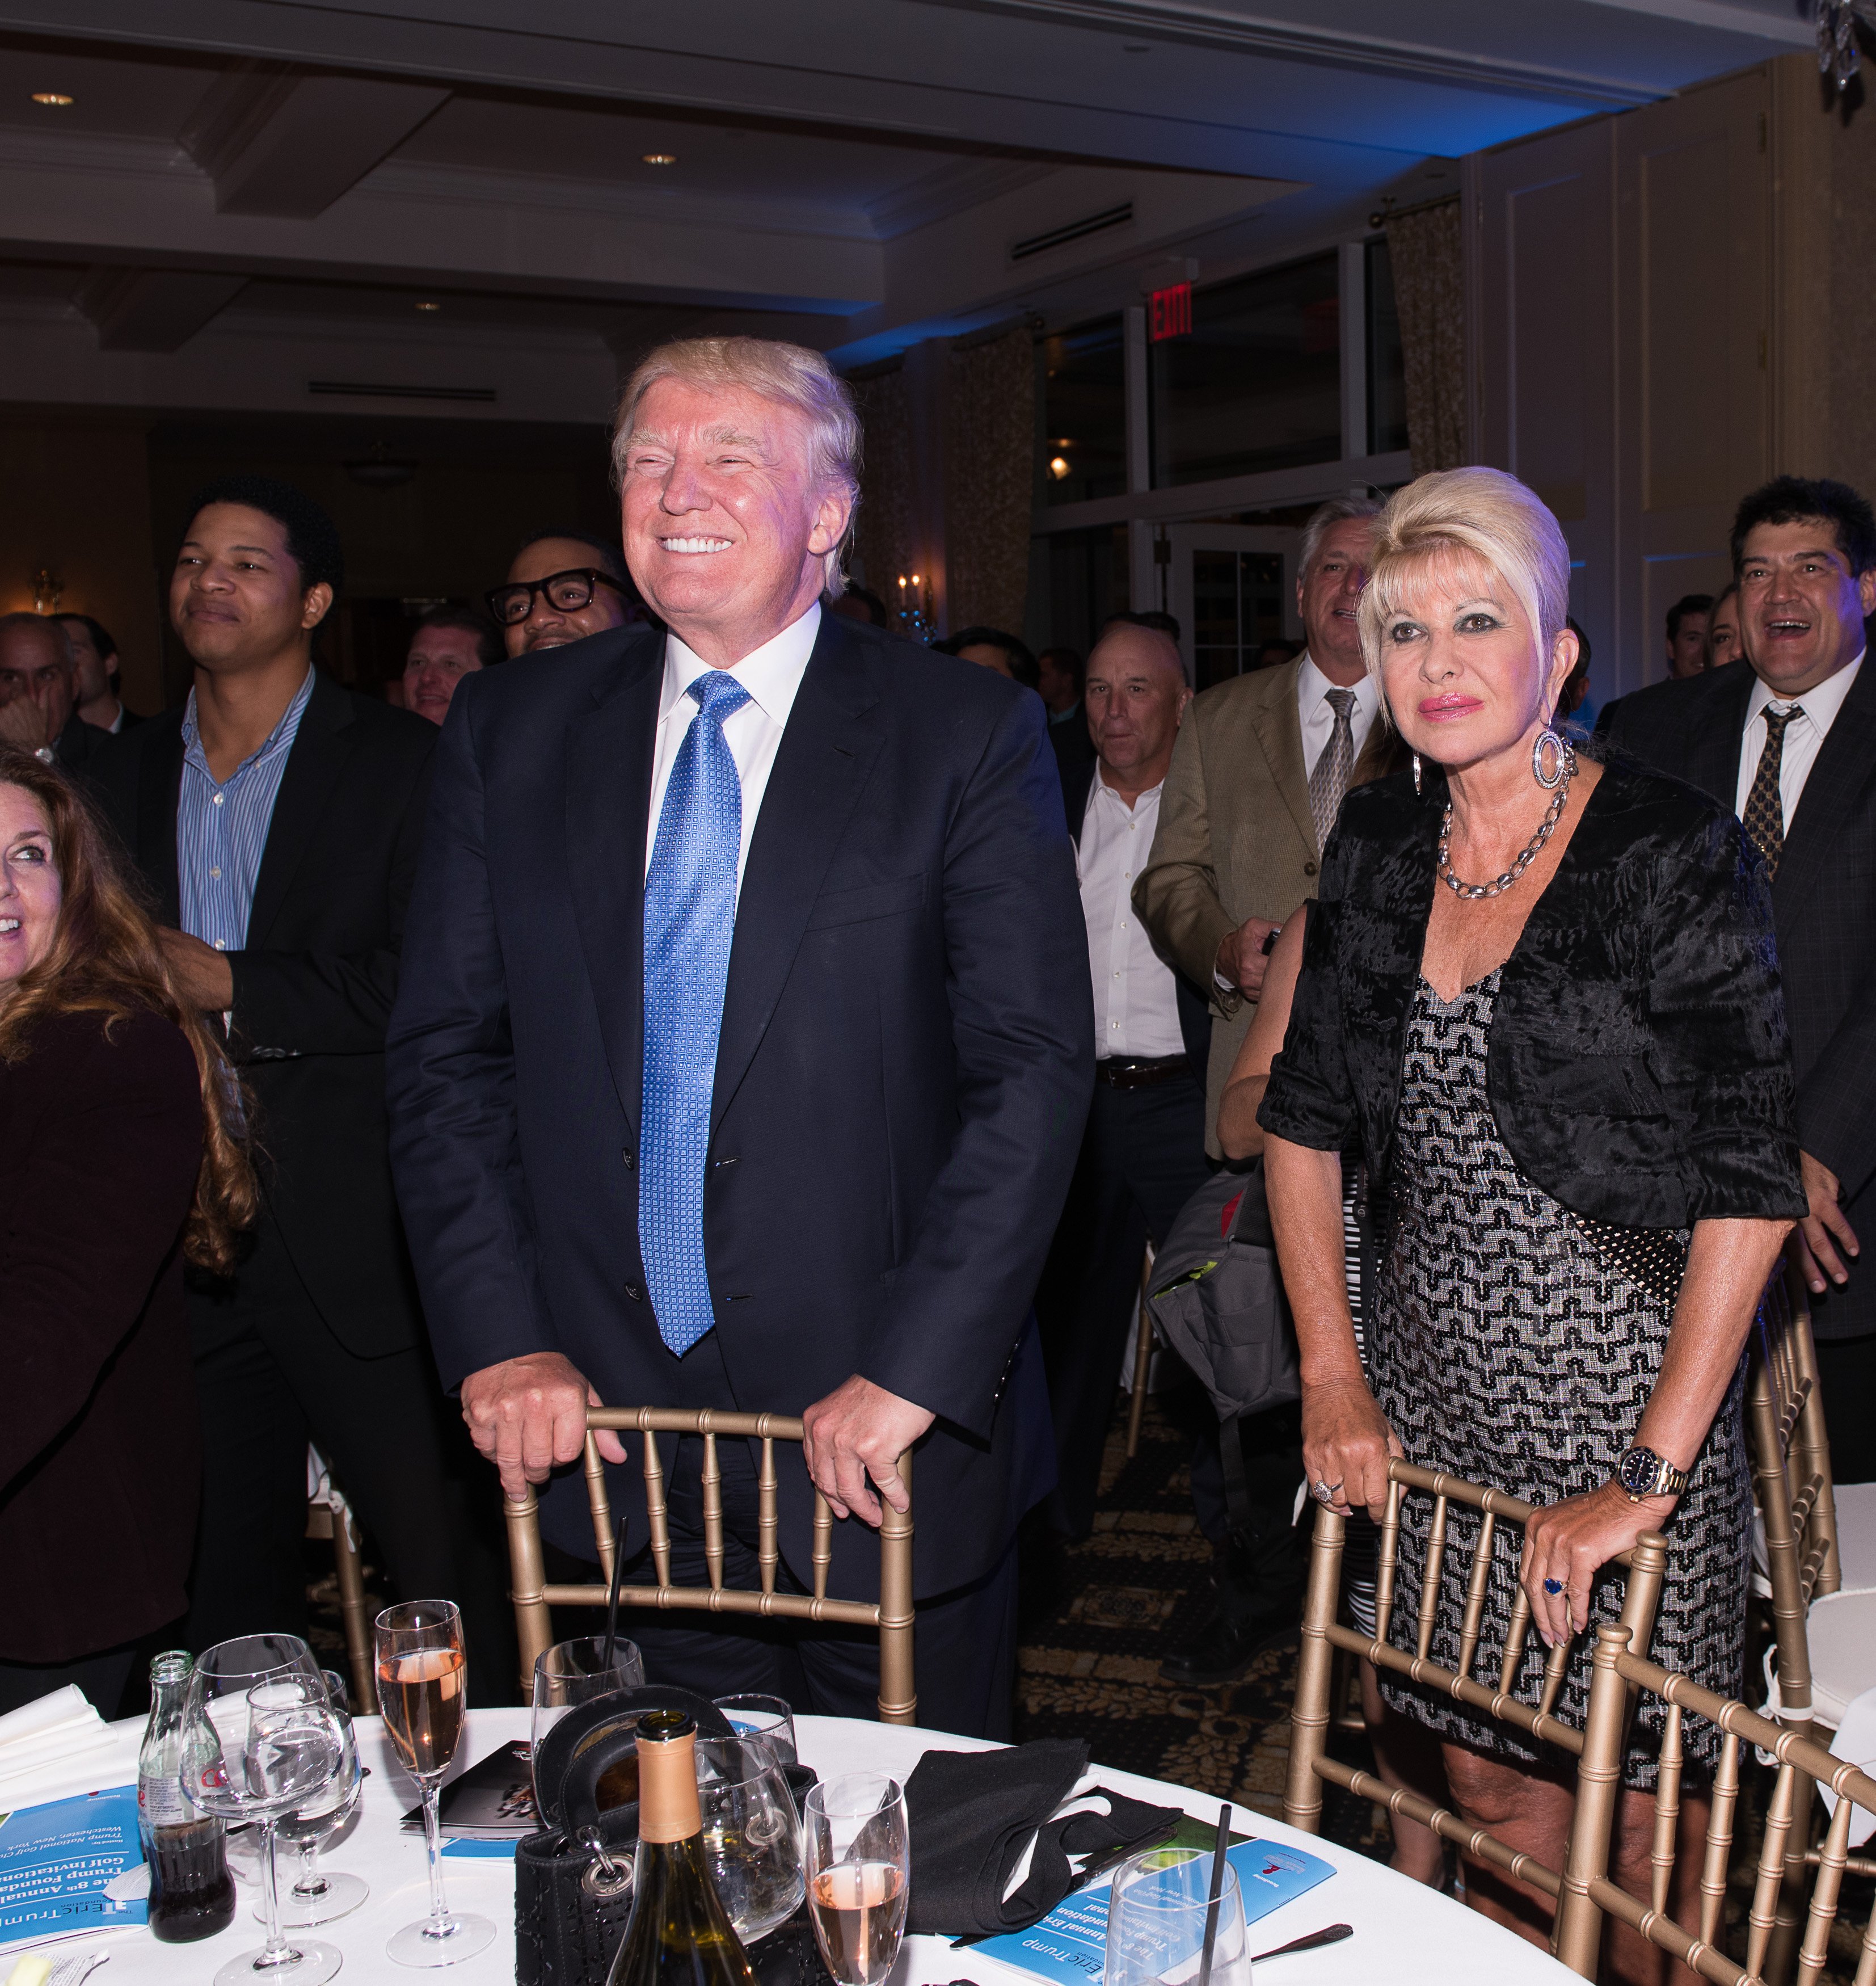 Donald Trump and Ivana Trump attending The Eric Trump 8th Annual Golf Tournament at Trump National Golf Club Westchester on September 15, 2014 in Briarcliff Manor, New York. / Source: Getty Images